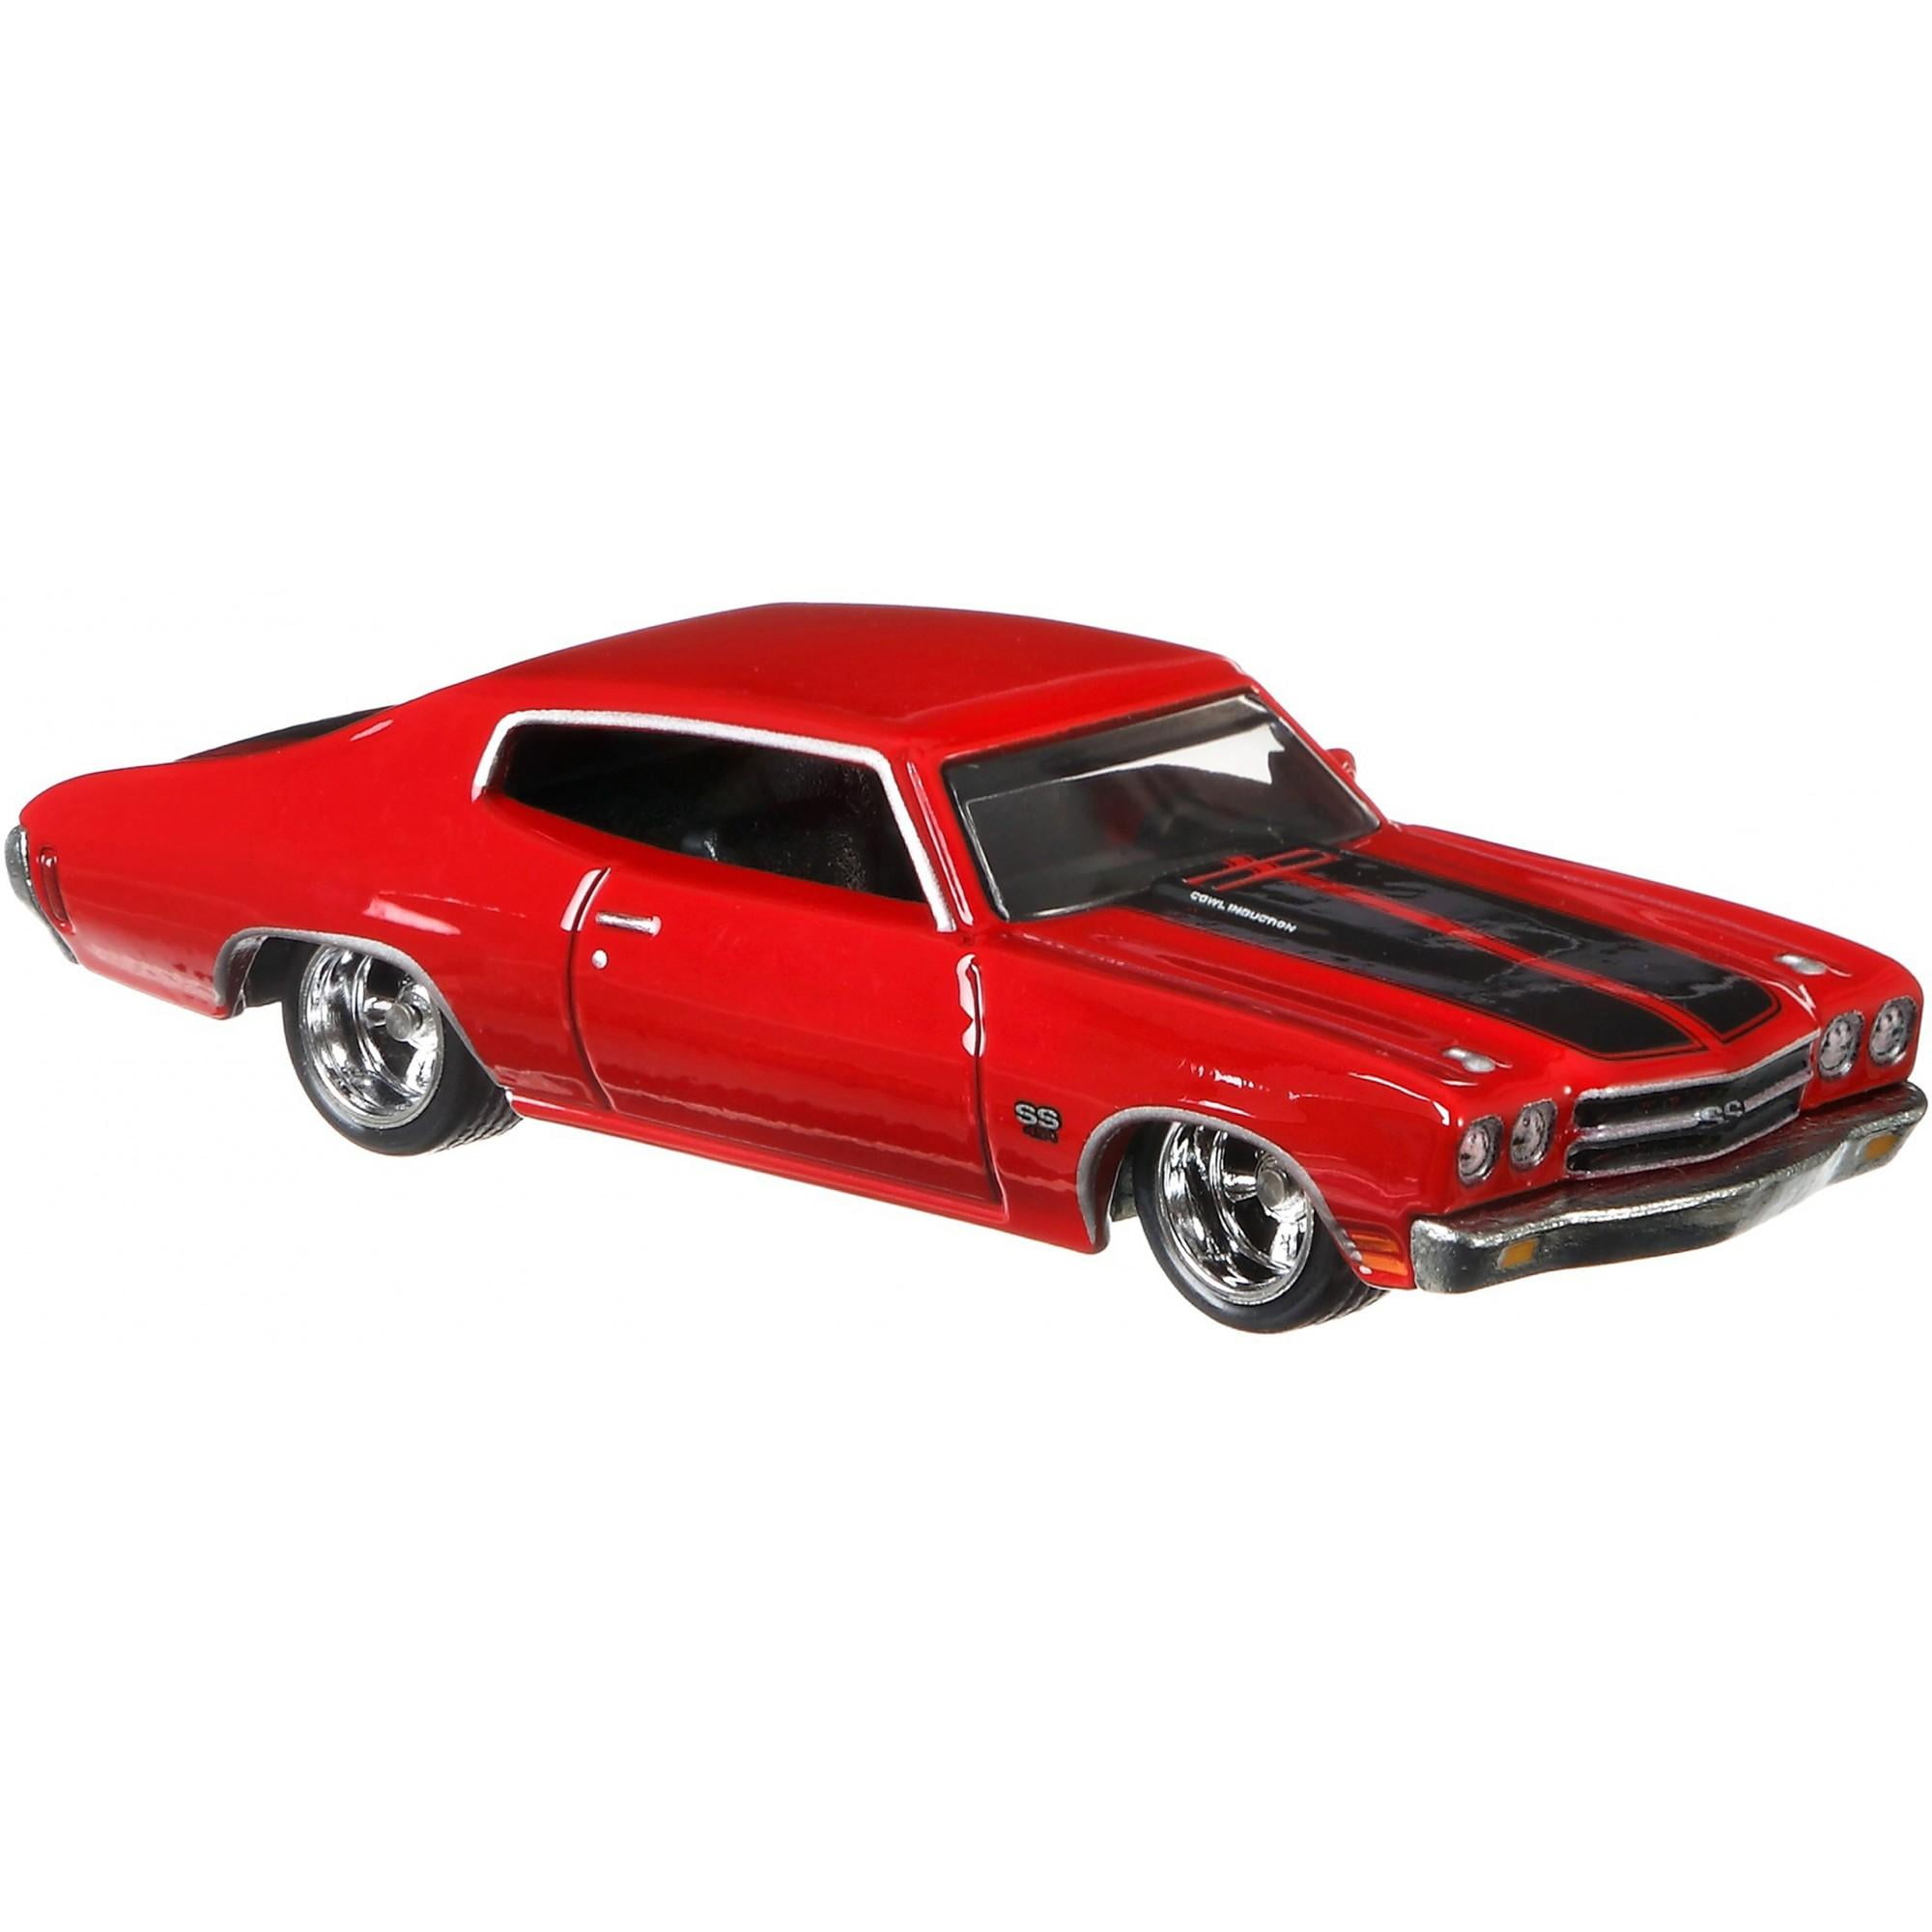 2020 HOT WHEELS FAST AND THE FURIOUS 70 CHEVELLE SS RED NICE!! 